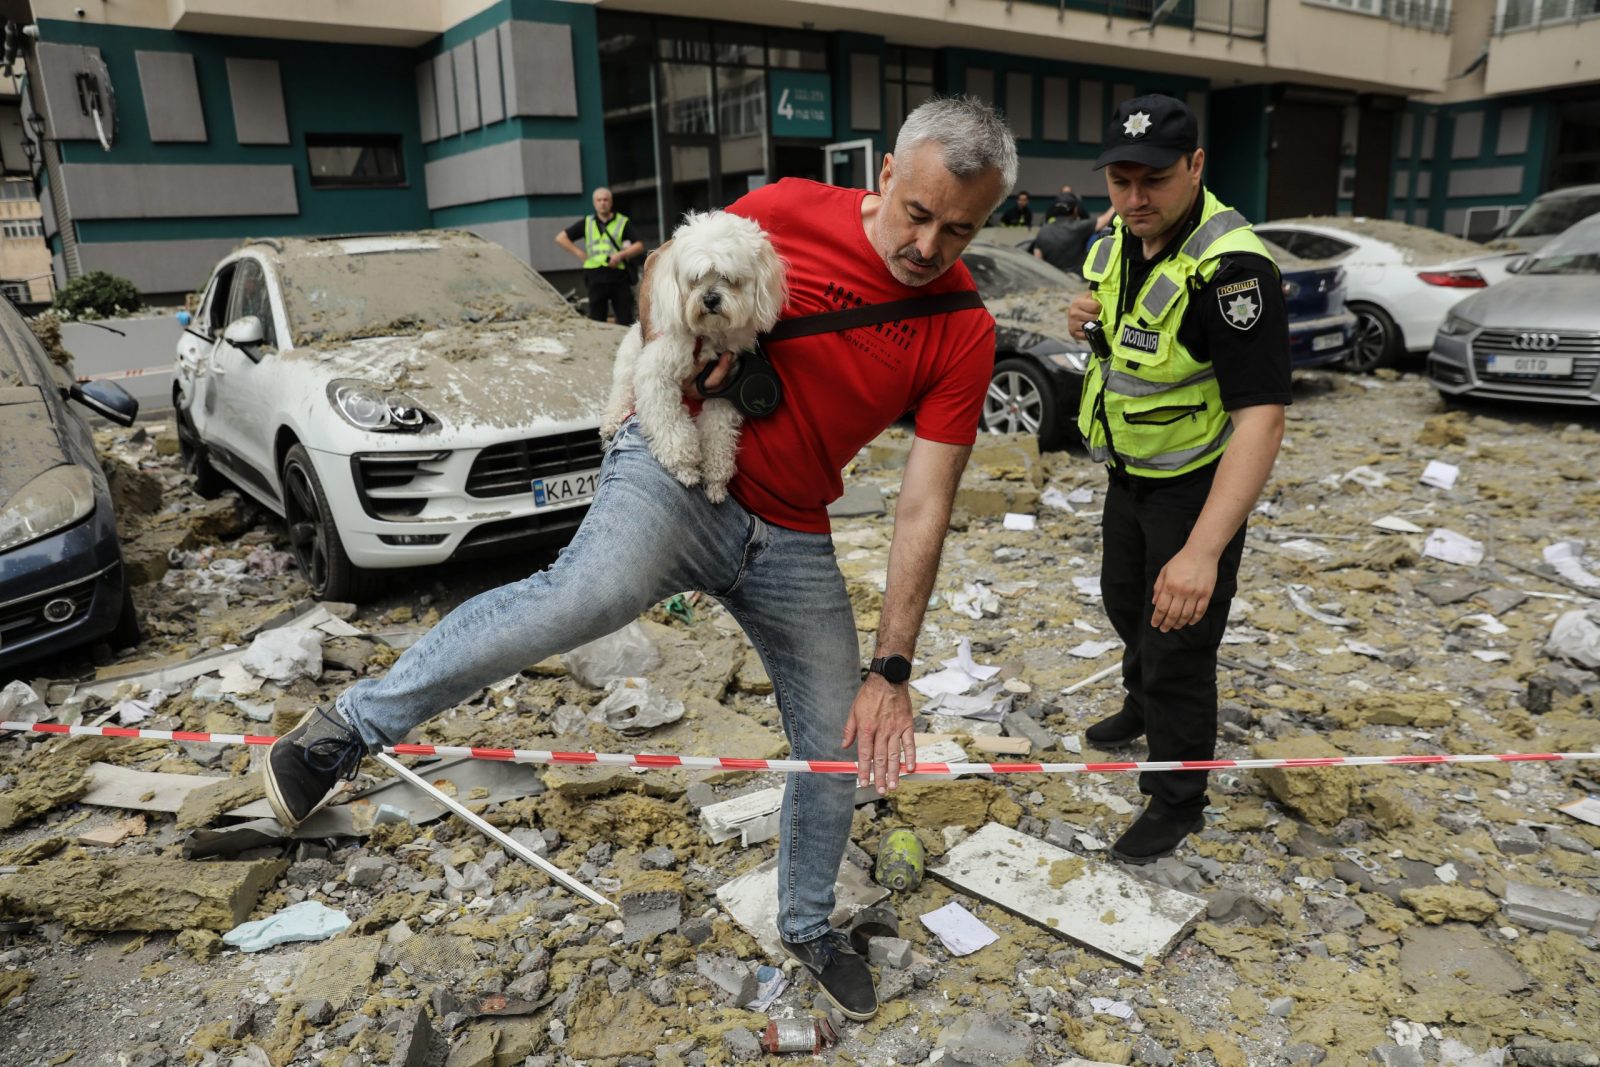 epa10709063 A local resident carries his dog as he leaves the area after an apartment block was damaged by rocket fragments in Kyiv (Kiev), Ukraine, 24 June 2023, amid the Russian invasion. At least three people were killed by rocket fragments hitting a high-rise building in the capital’s Solomyan district, Kyiv Mayor Vitali Klitschko confirmed. According to the Ukrainian Air Force, Russia fired 41 missiles and one shock drone on Ukraine. All air targets were shot down.  EPA/OLEG PETRASYUK